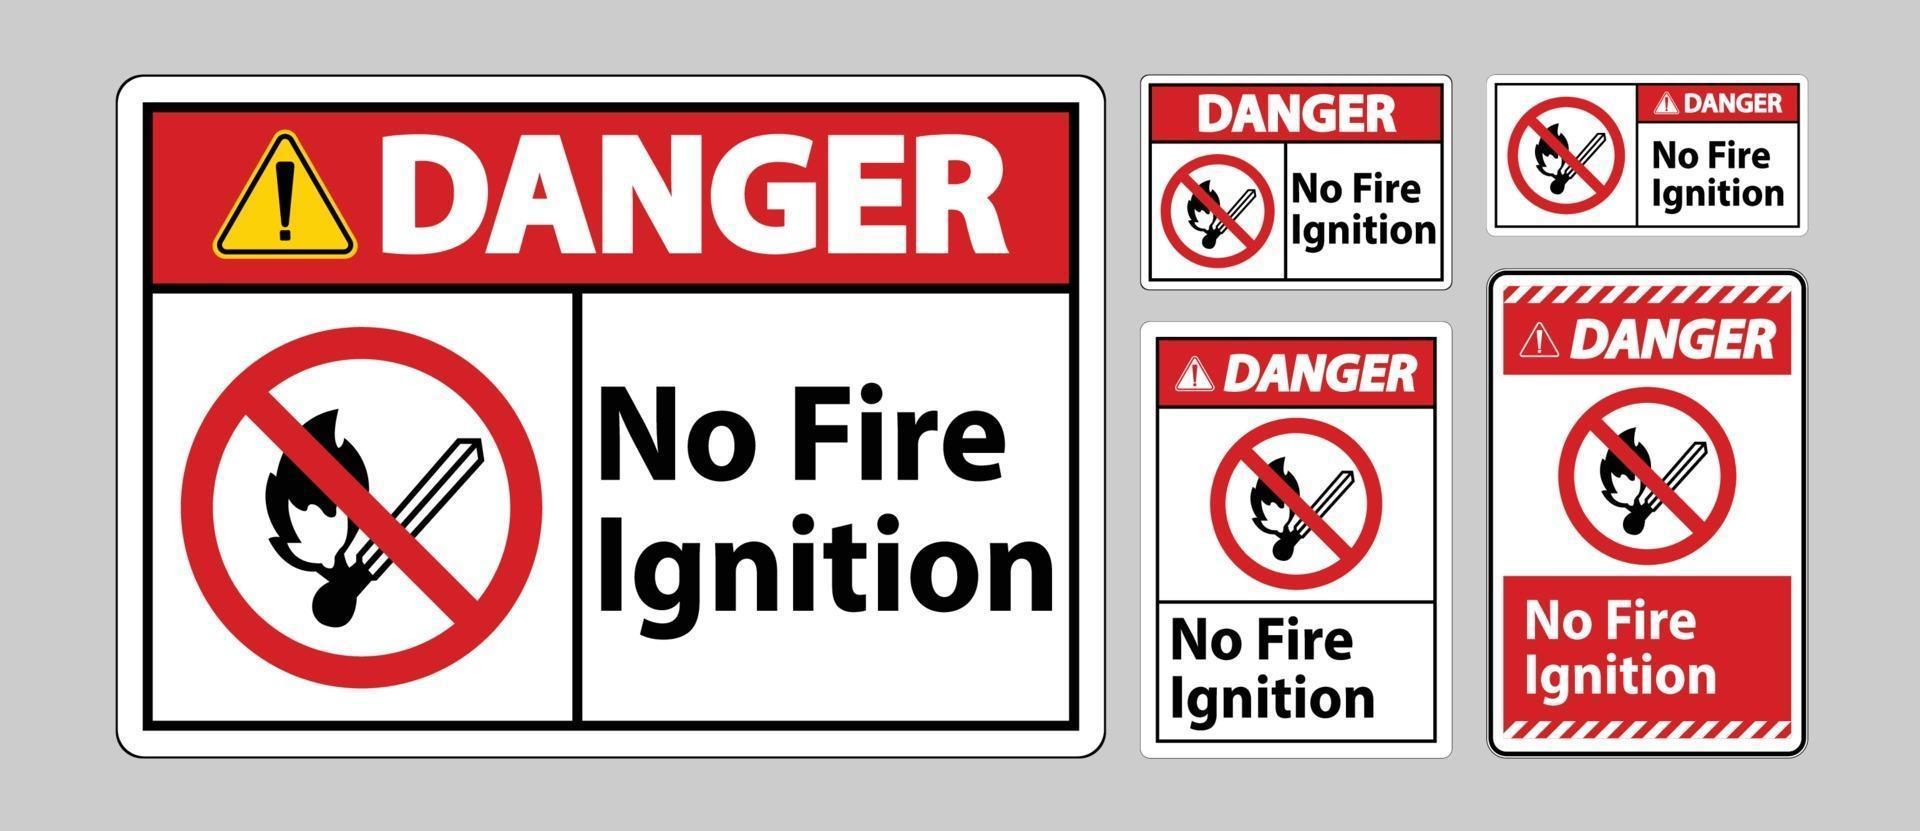 Danger No Fire Ignition Symbol Sign On White Background vector